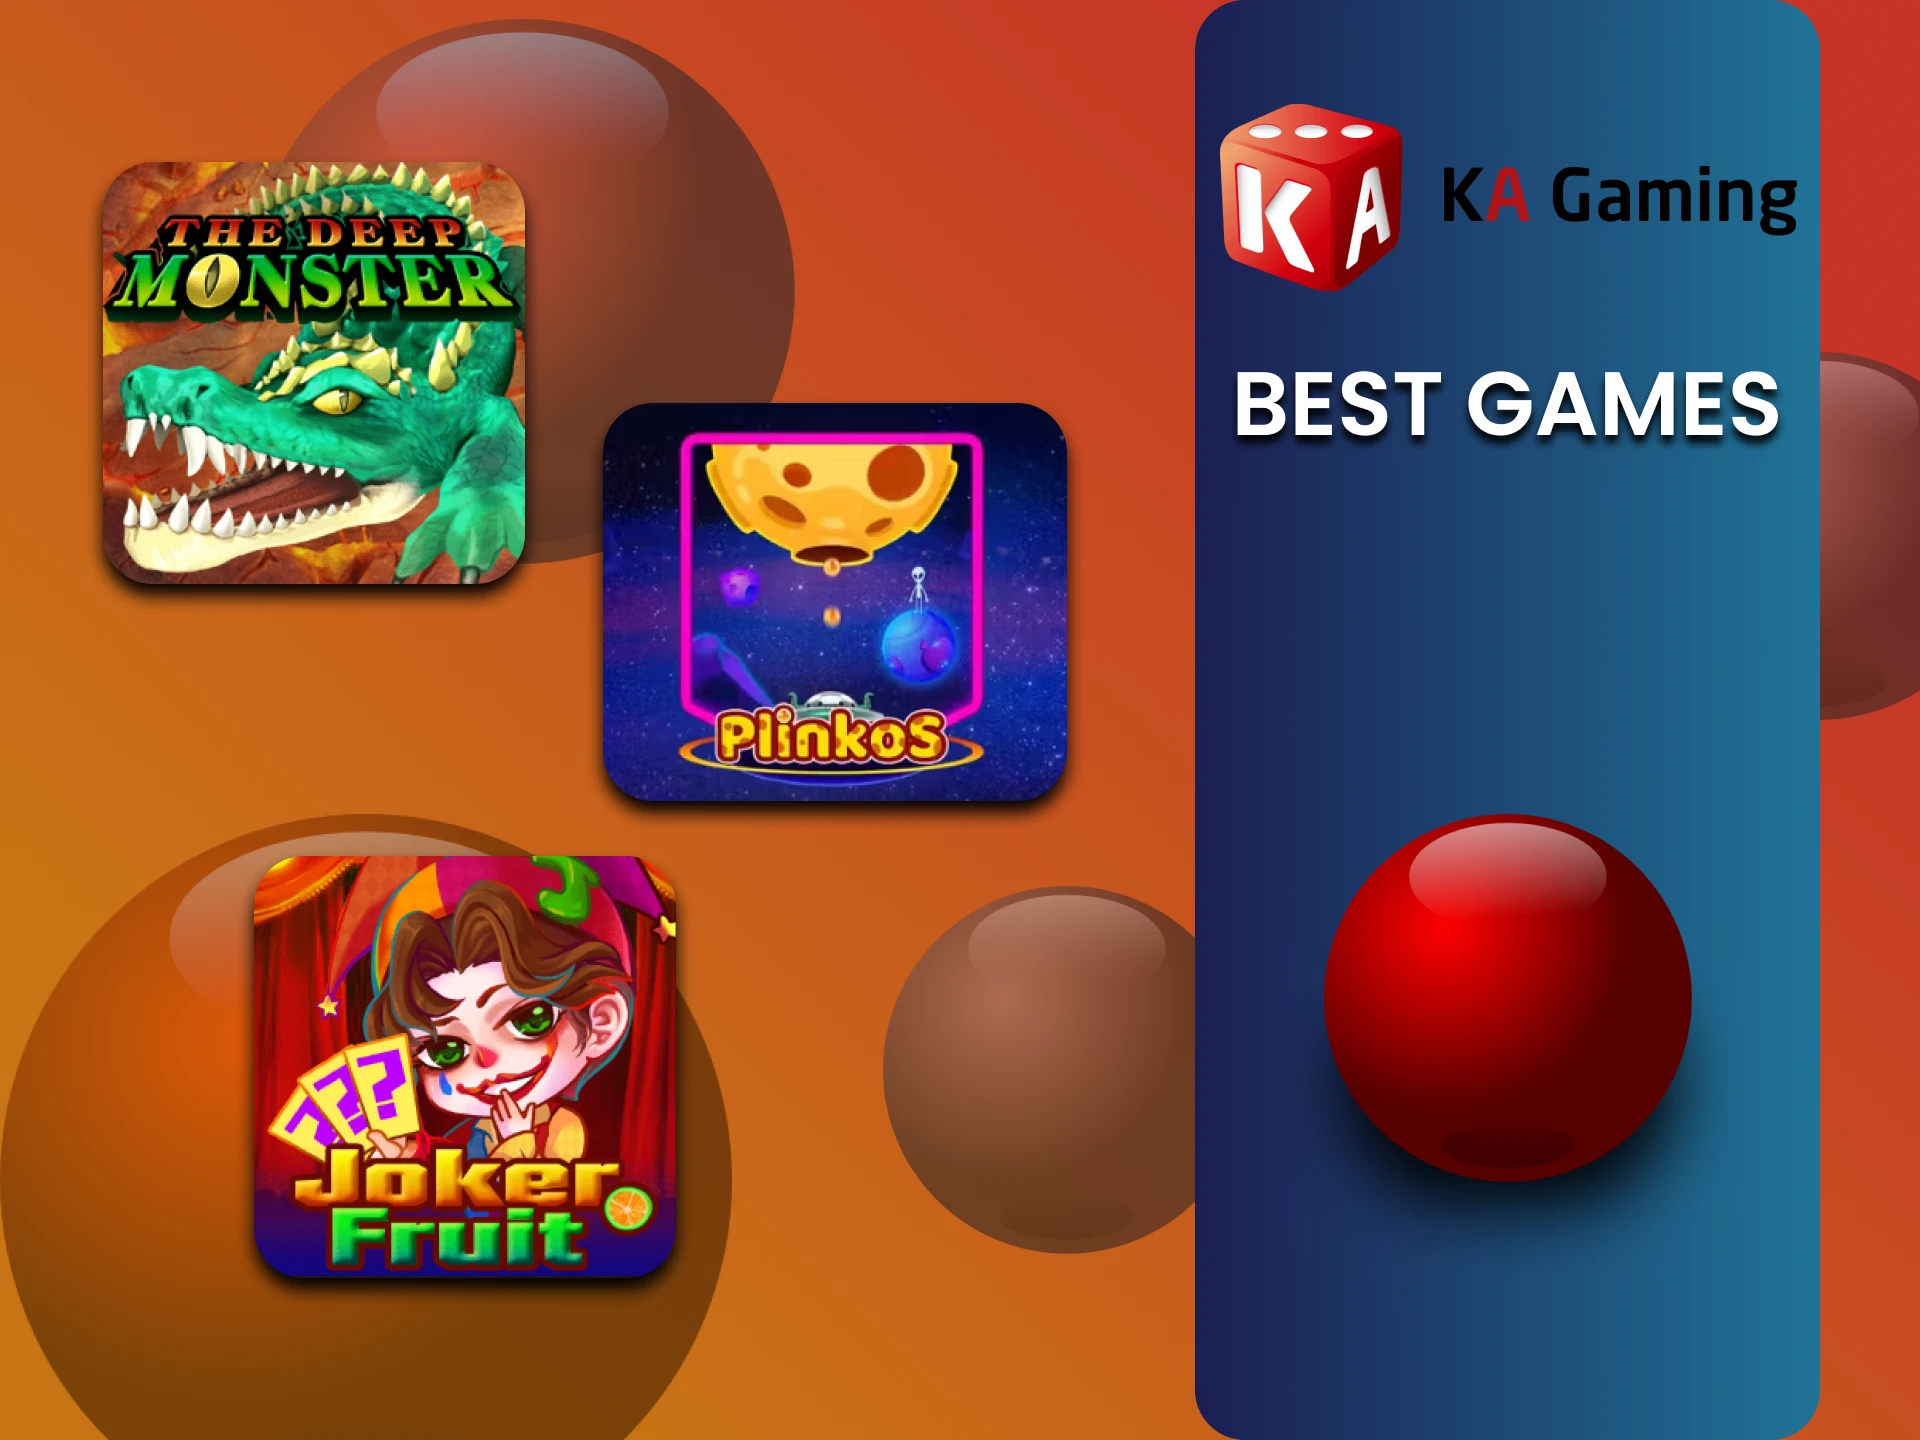 We will provide a list of the best games from KA Gaming.